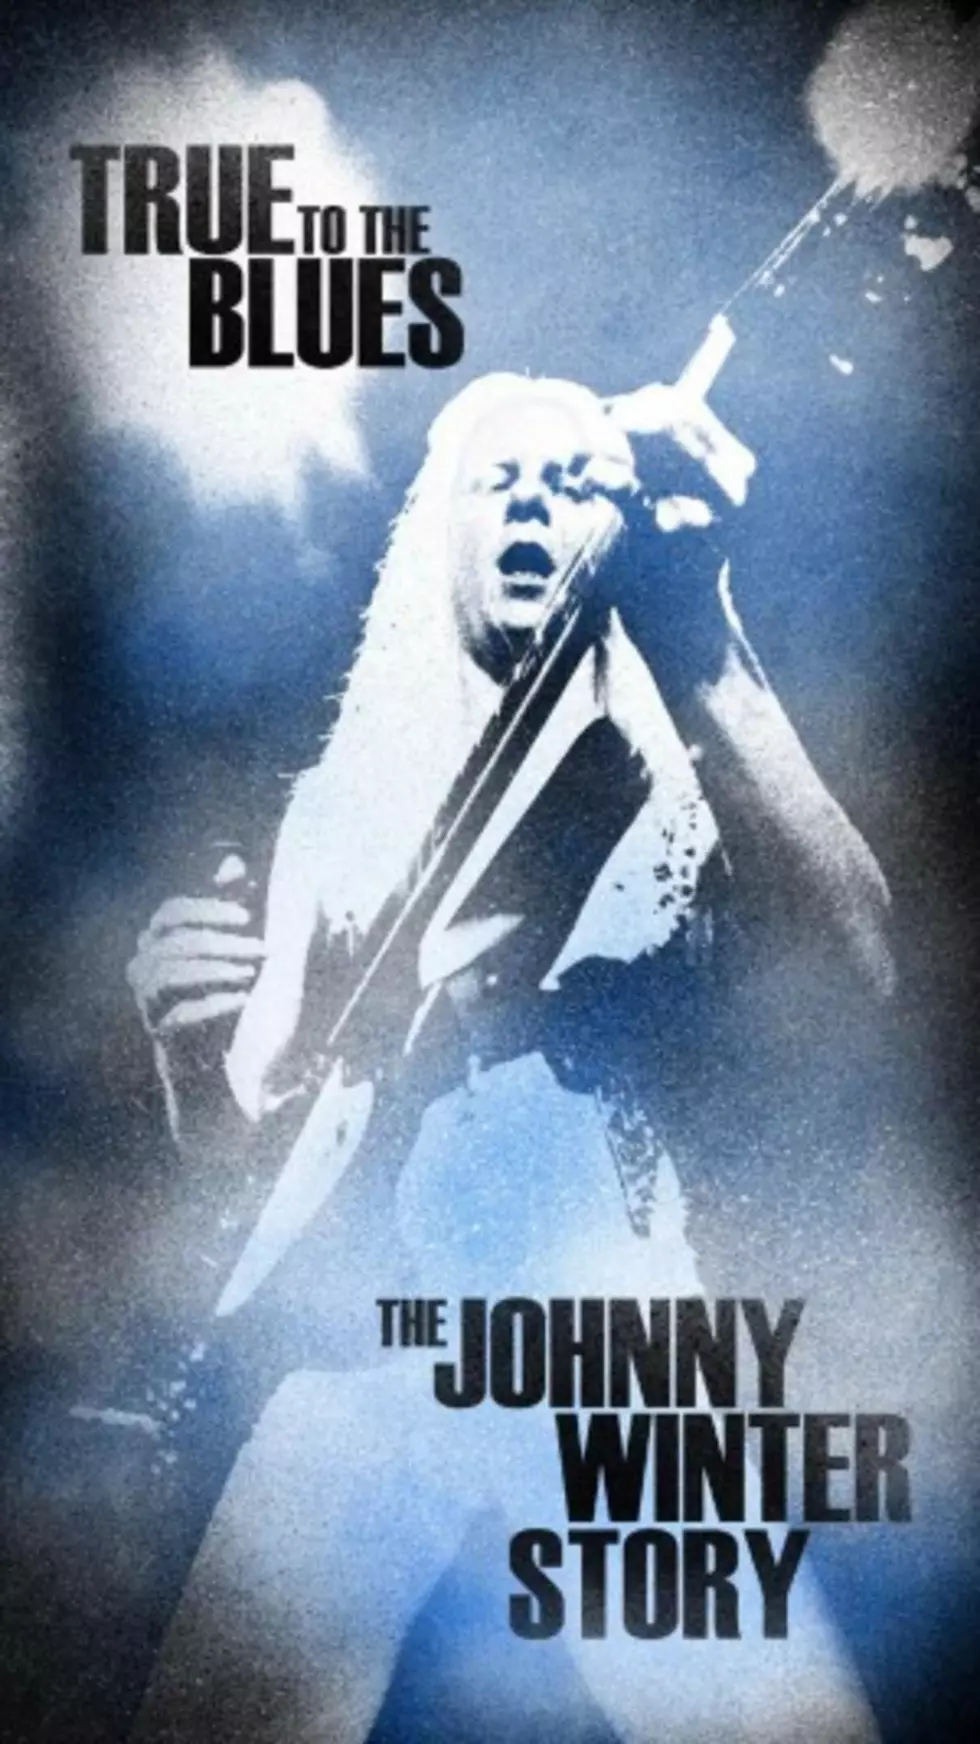 Johnny Winter, &#8216;True to the Blues: The Johnny Winter Story&#8217;